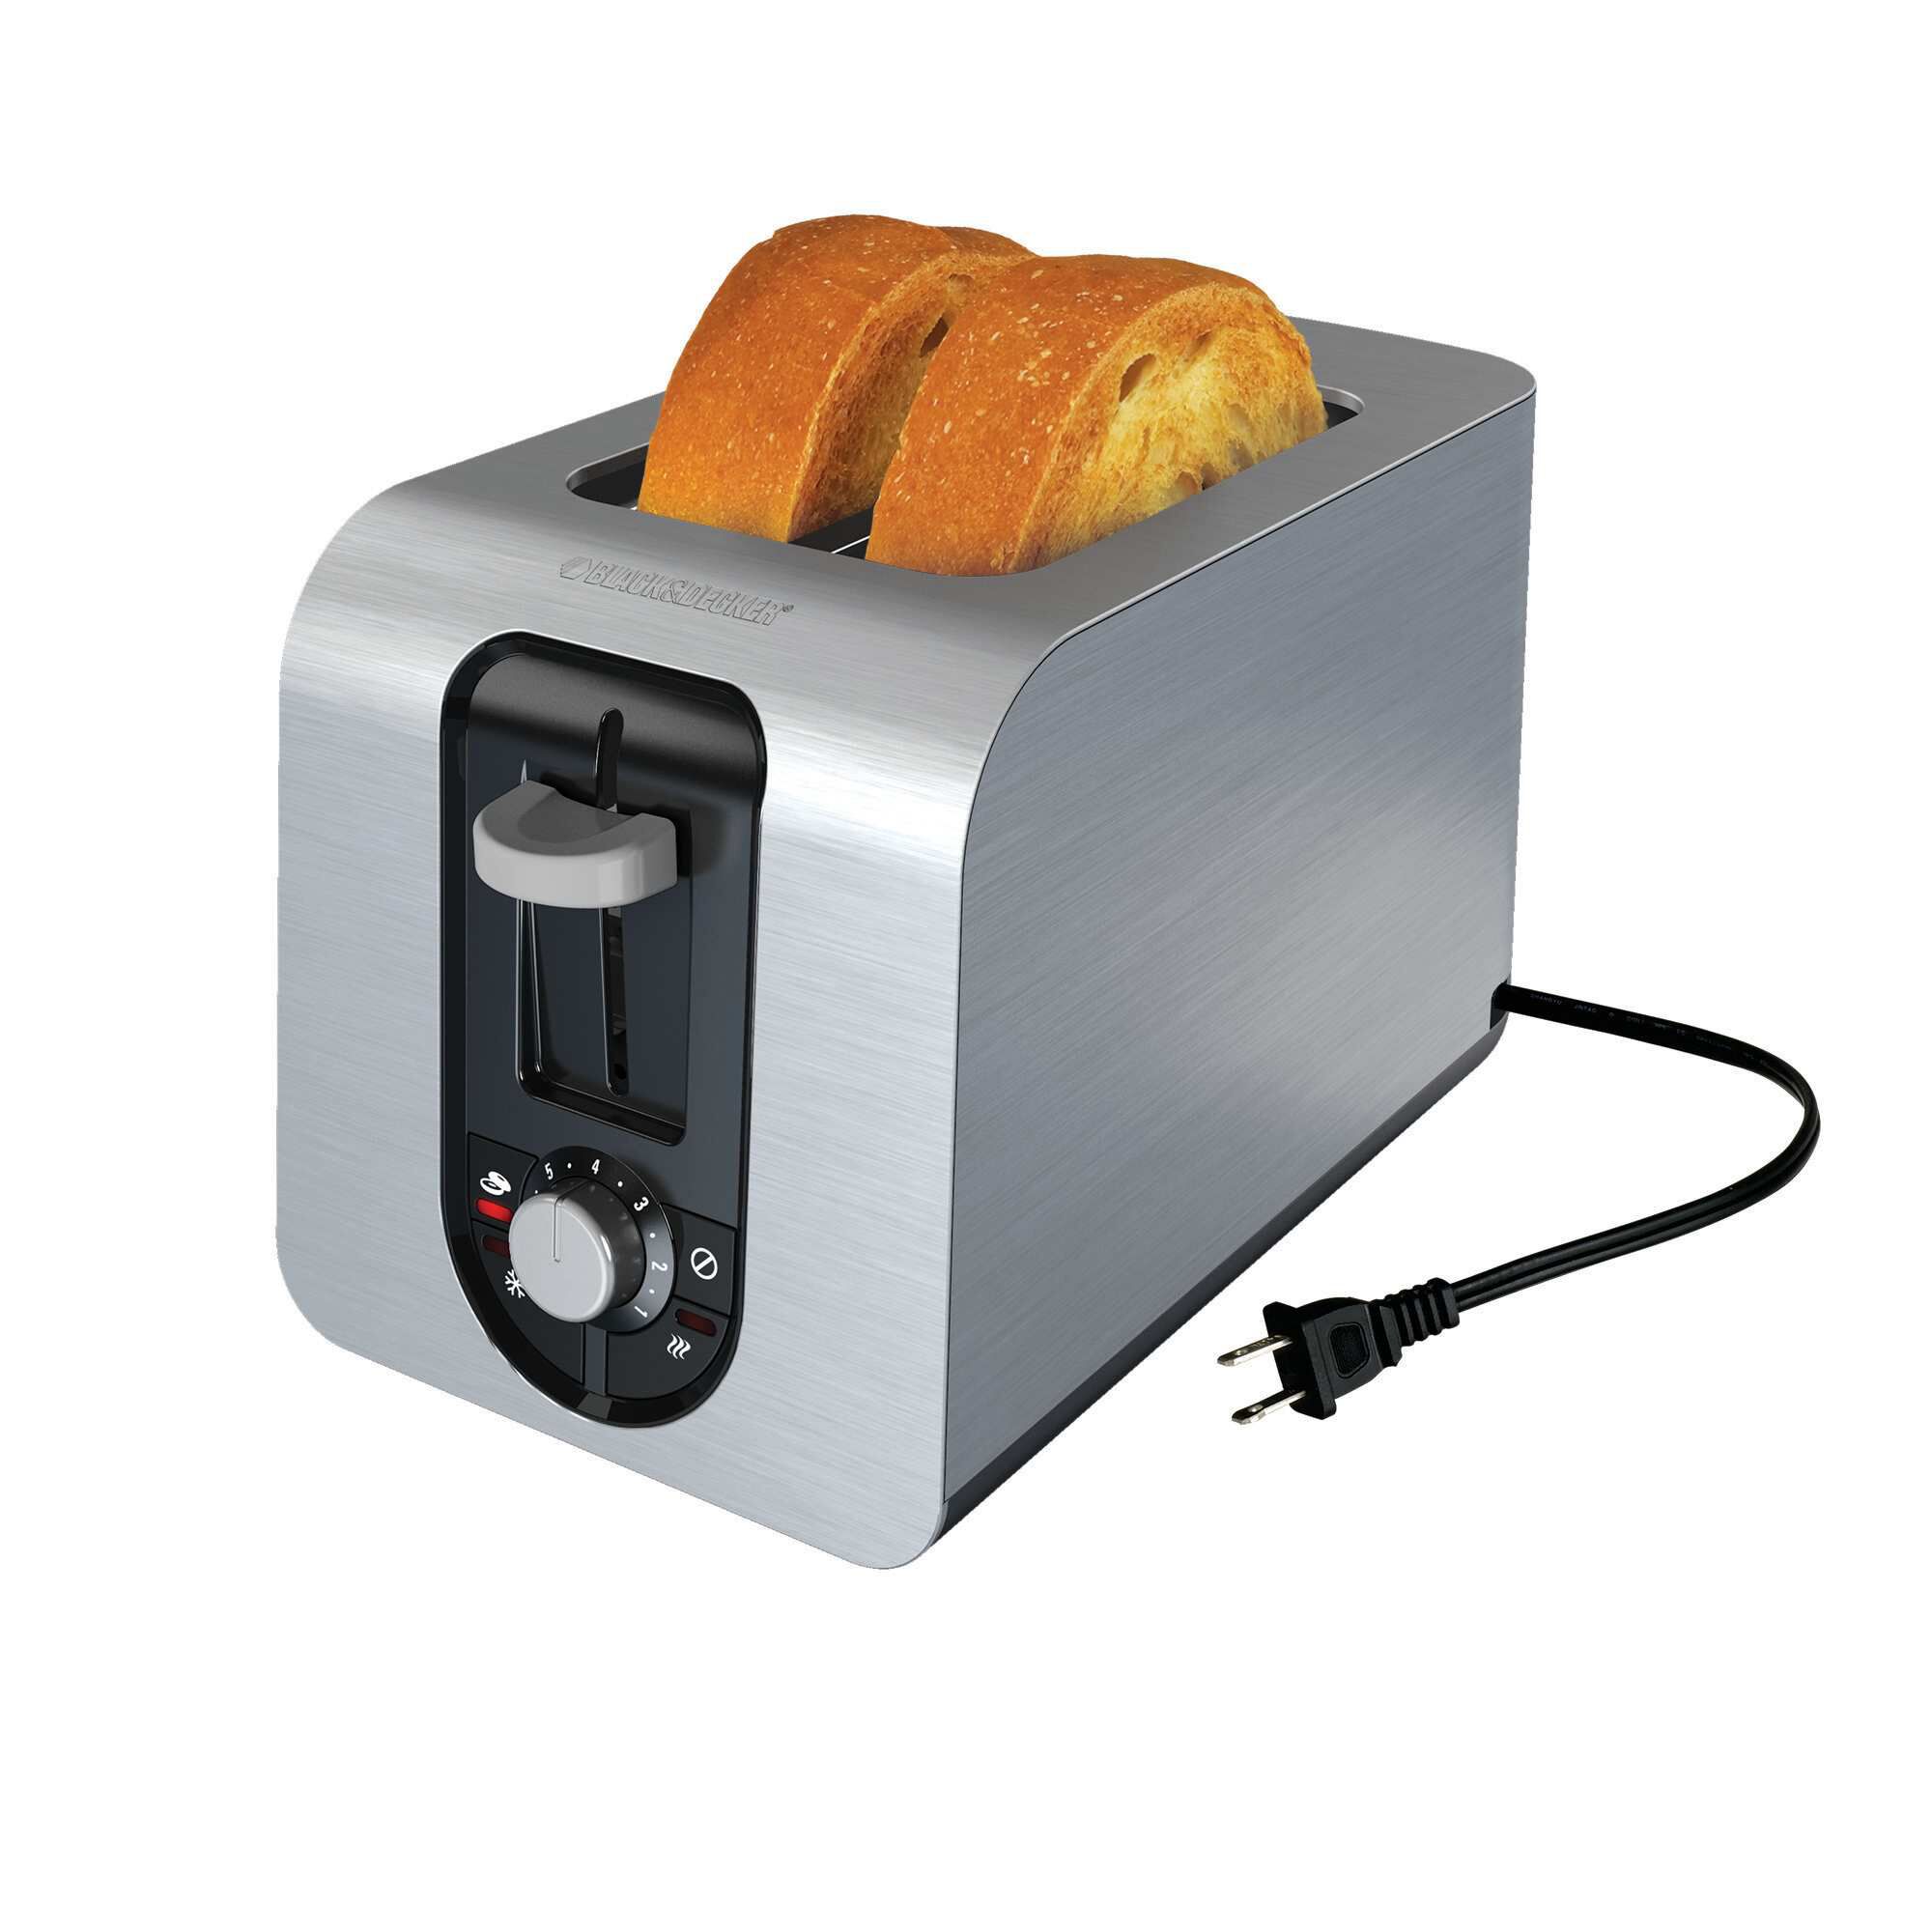 Profile of 2 Slice Toaster protruding baked bread.